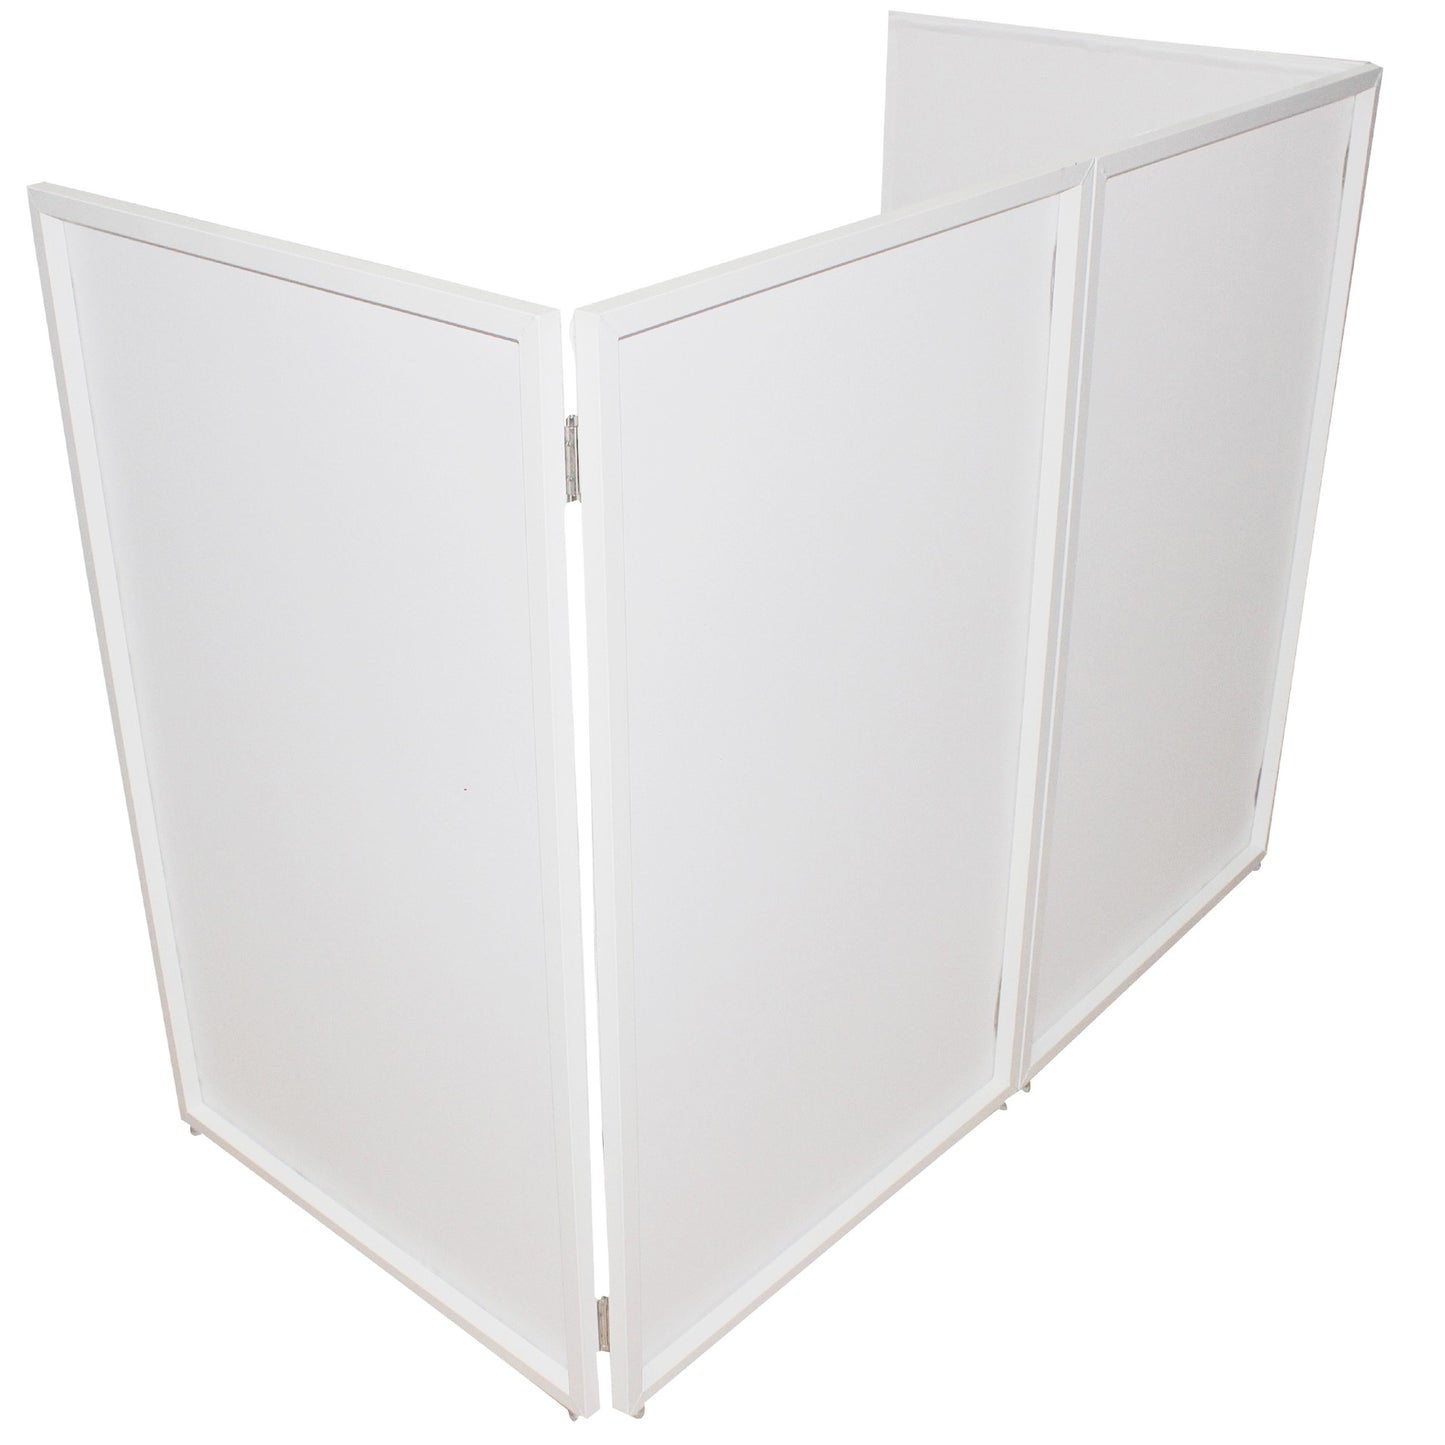 ProX Four Panel Collapse and Go DJ Facade - White Frame and Carry Bag